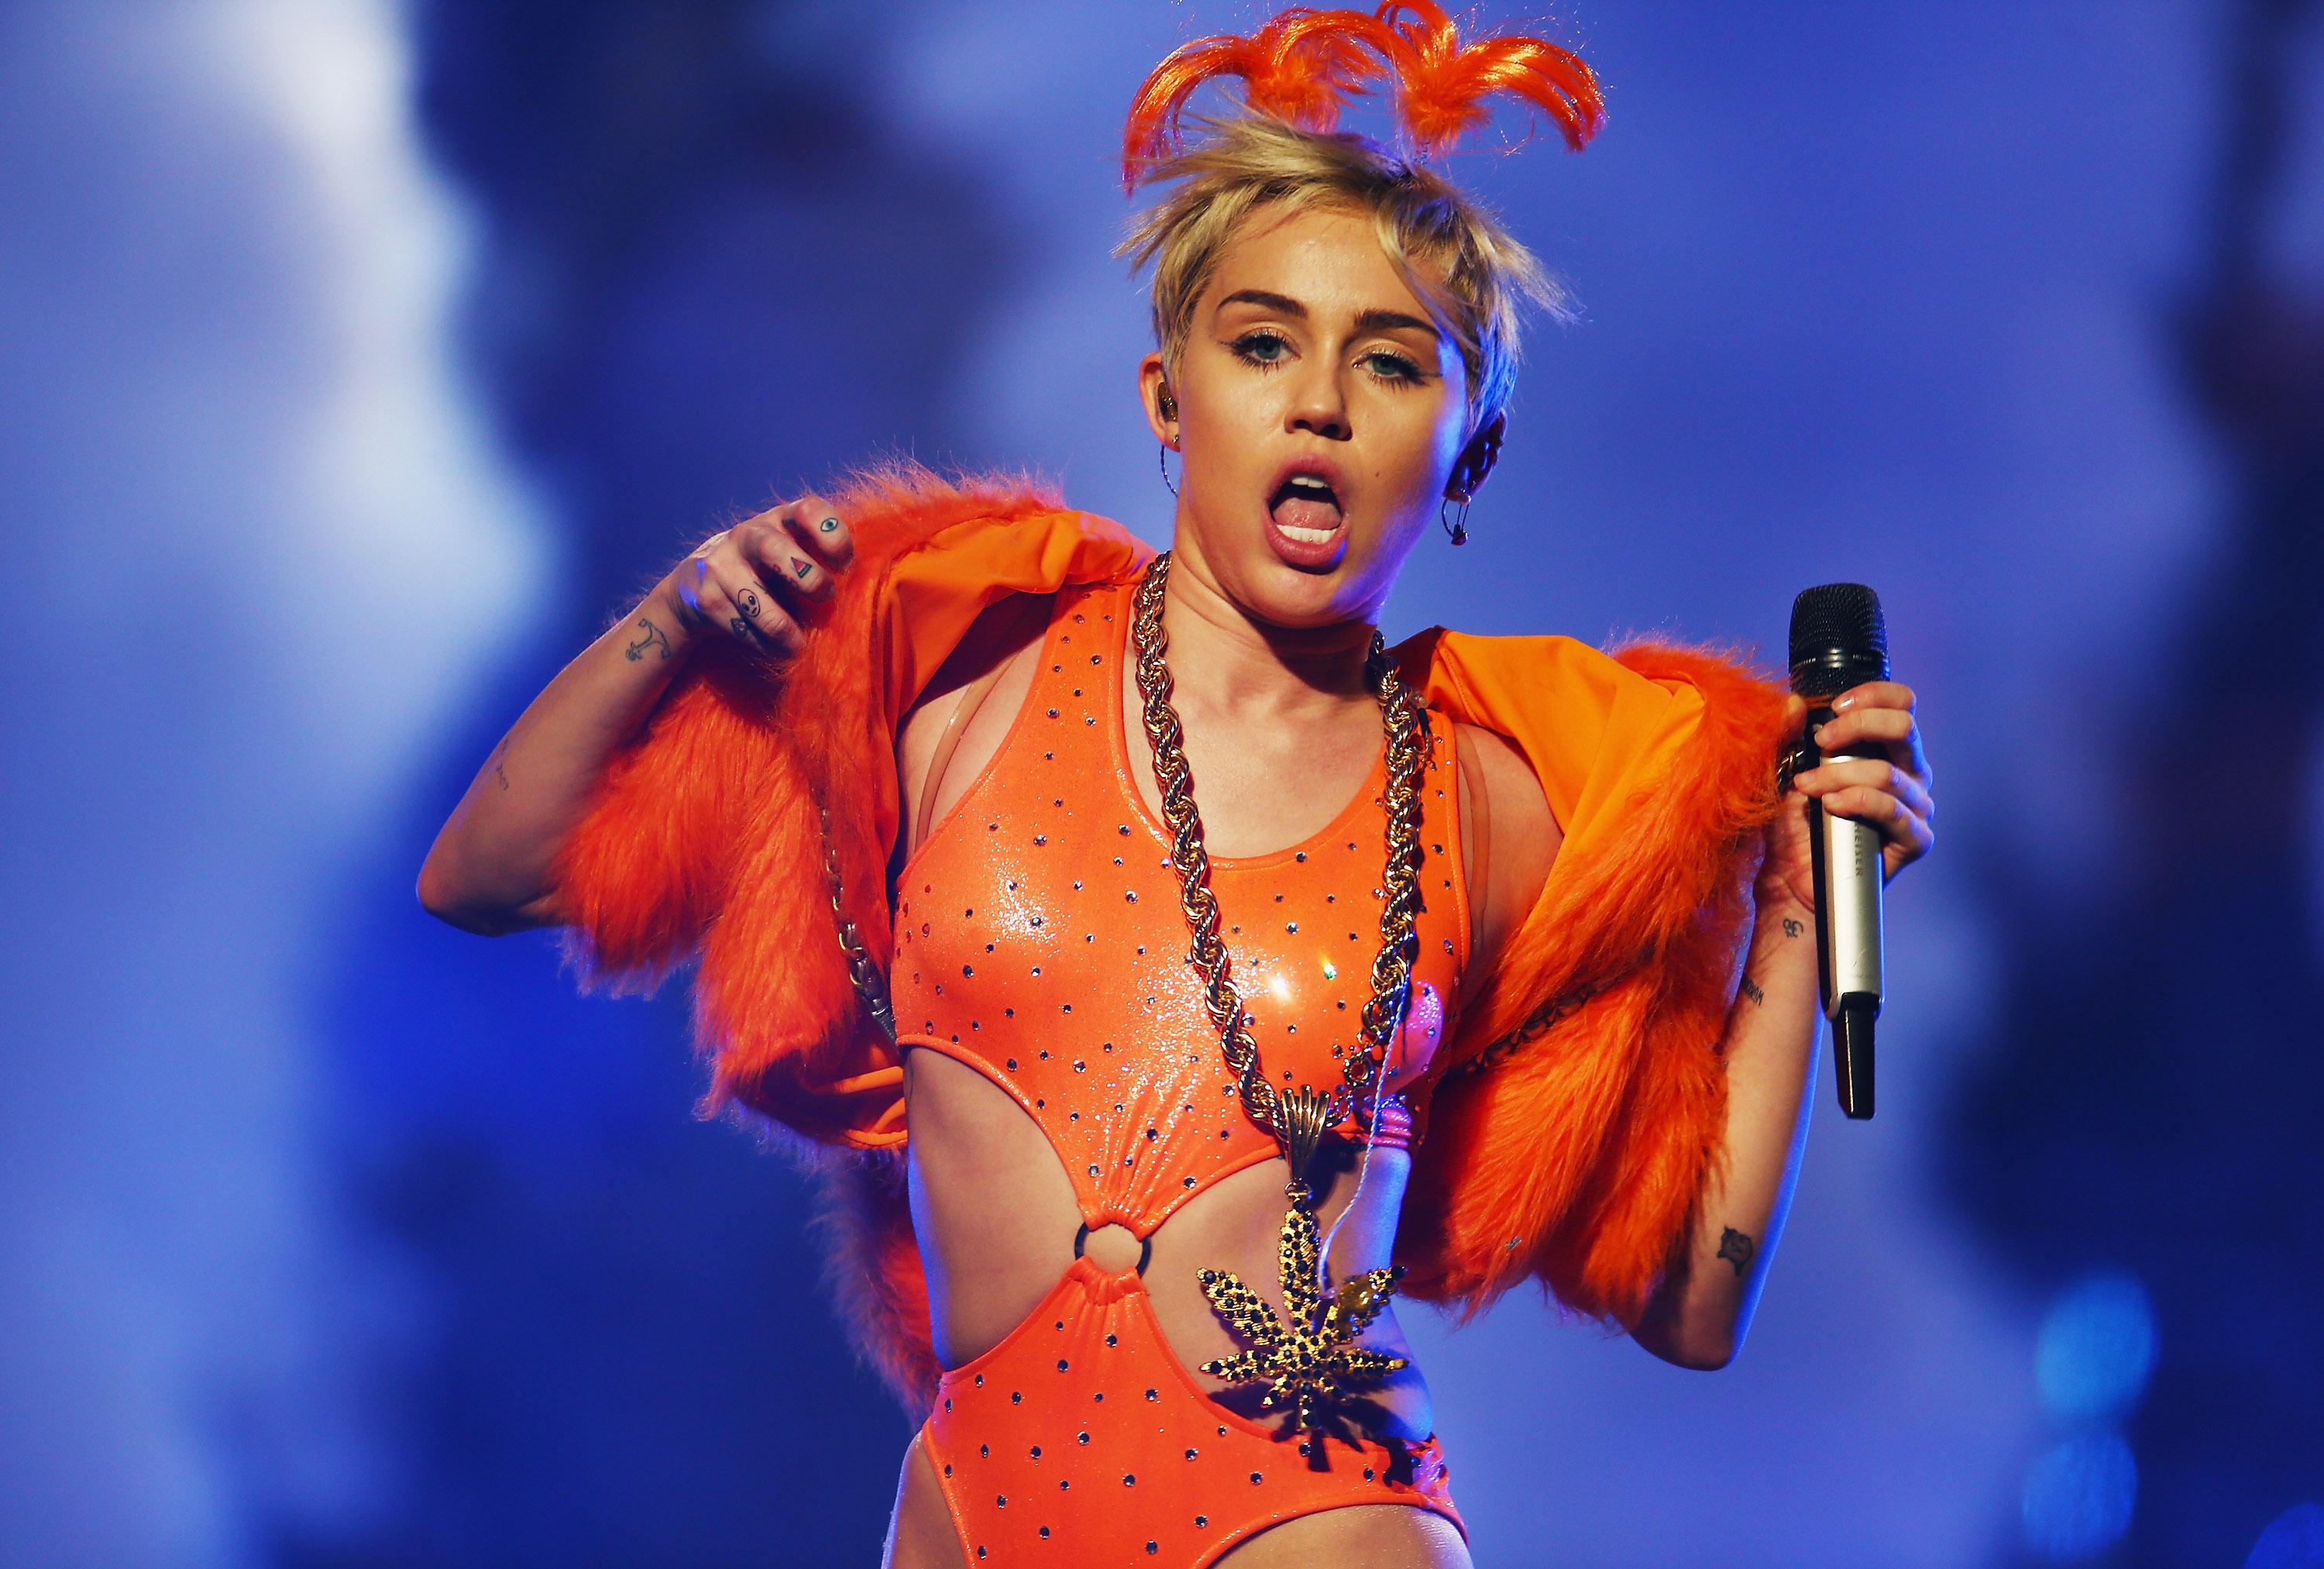 Miley Porn - Miley Cyrus film pulled from porn festival - NZ Herald